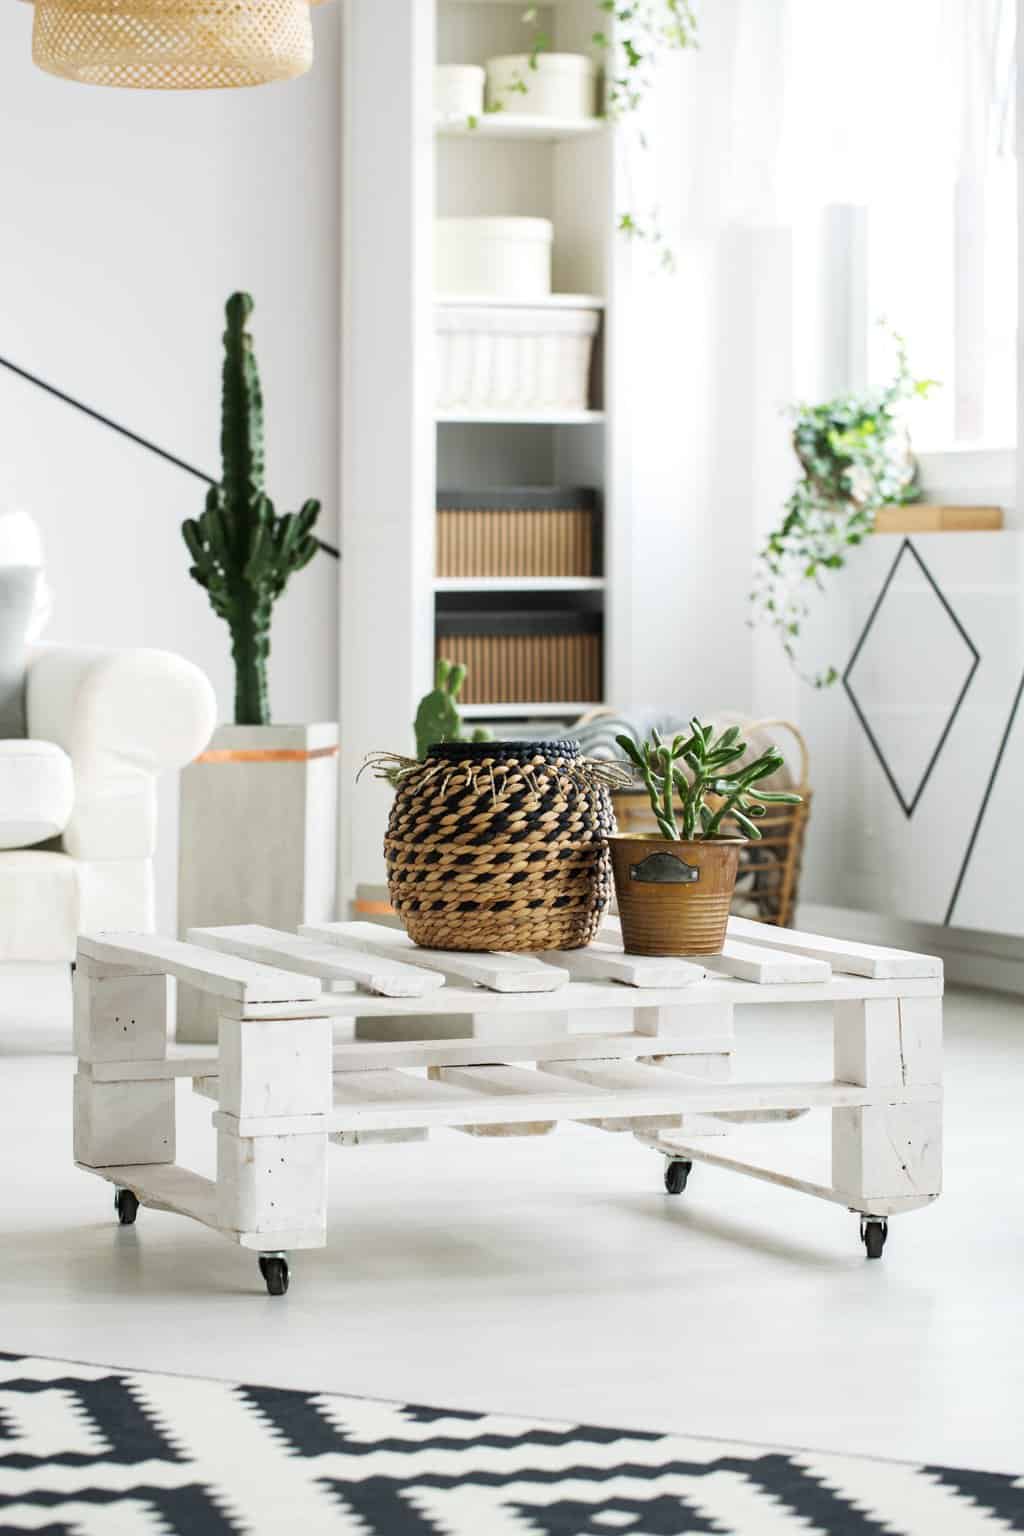 White wooden coffee table made of pallets with plants on it